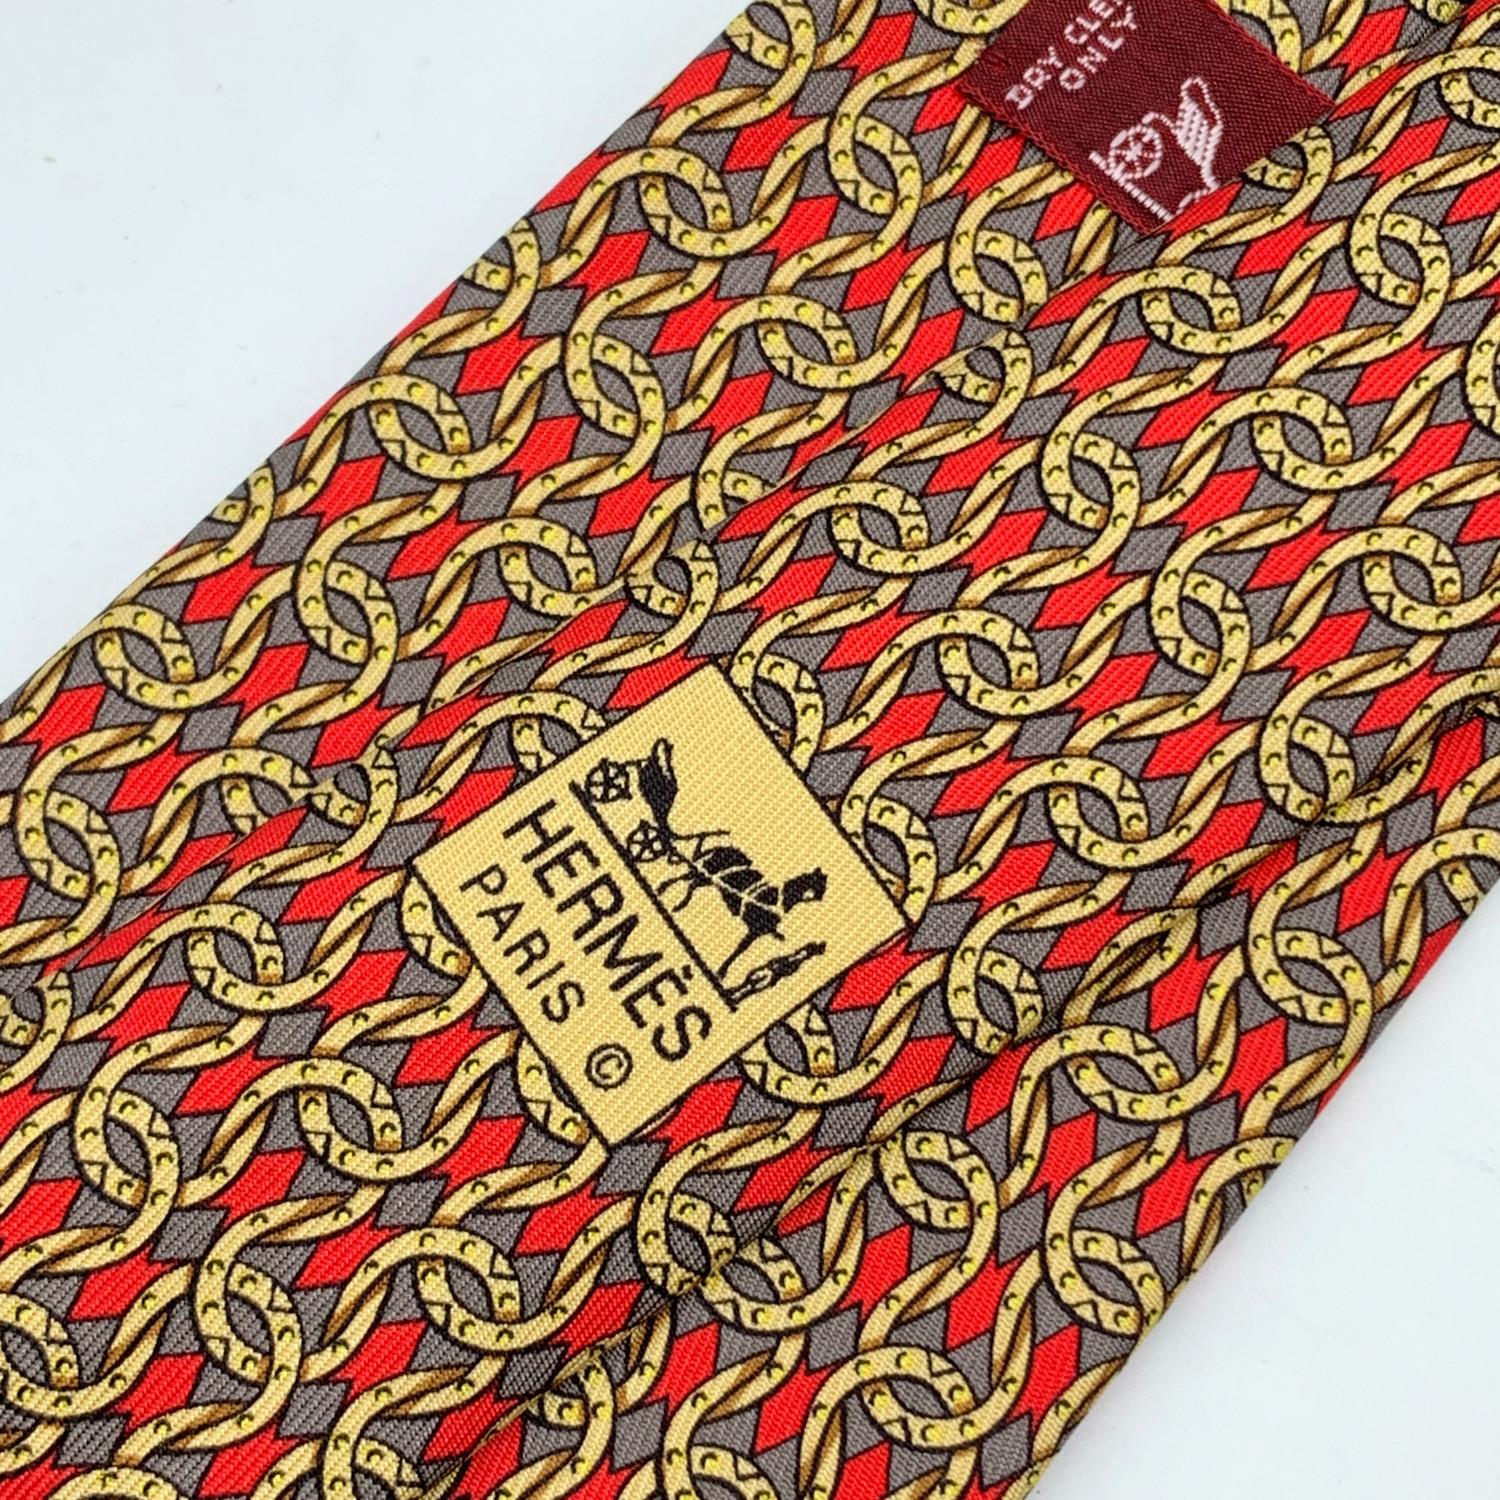 Brown Hermes Paris Red and Yellow Silk Chain Link Print Neck Tie 7668 TA